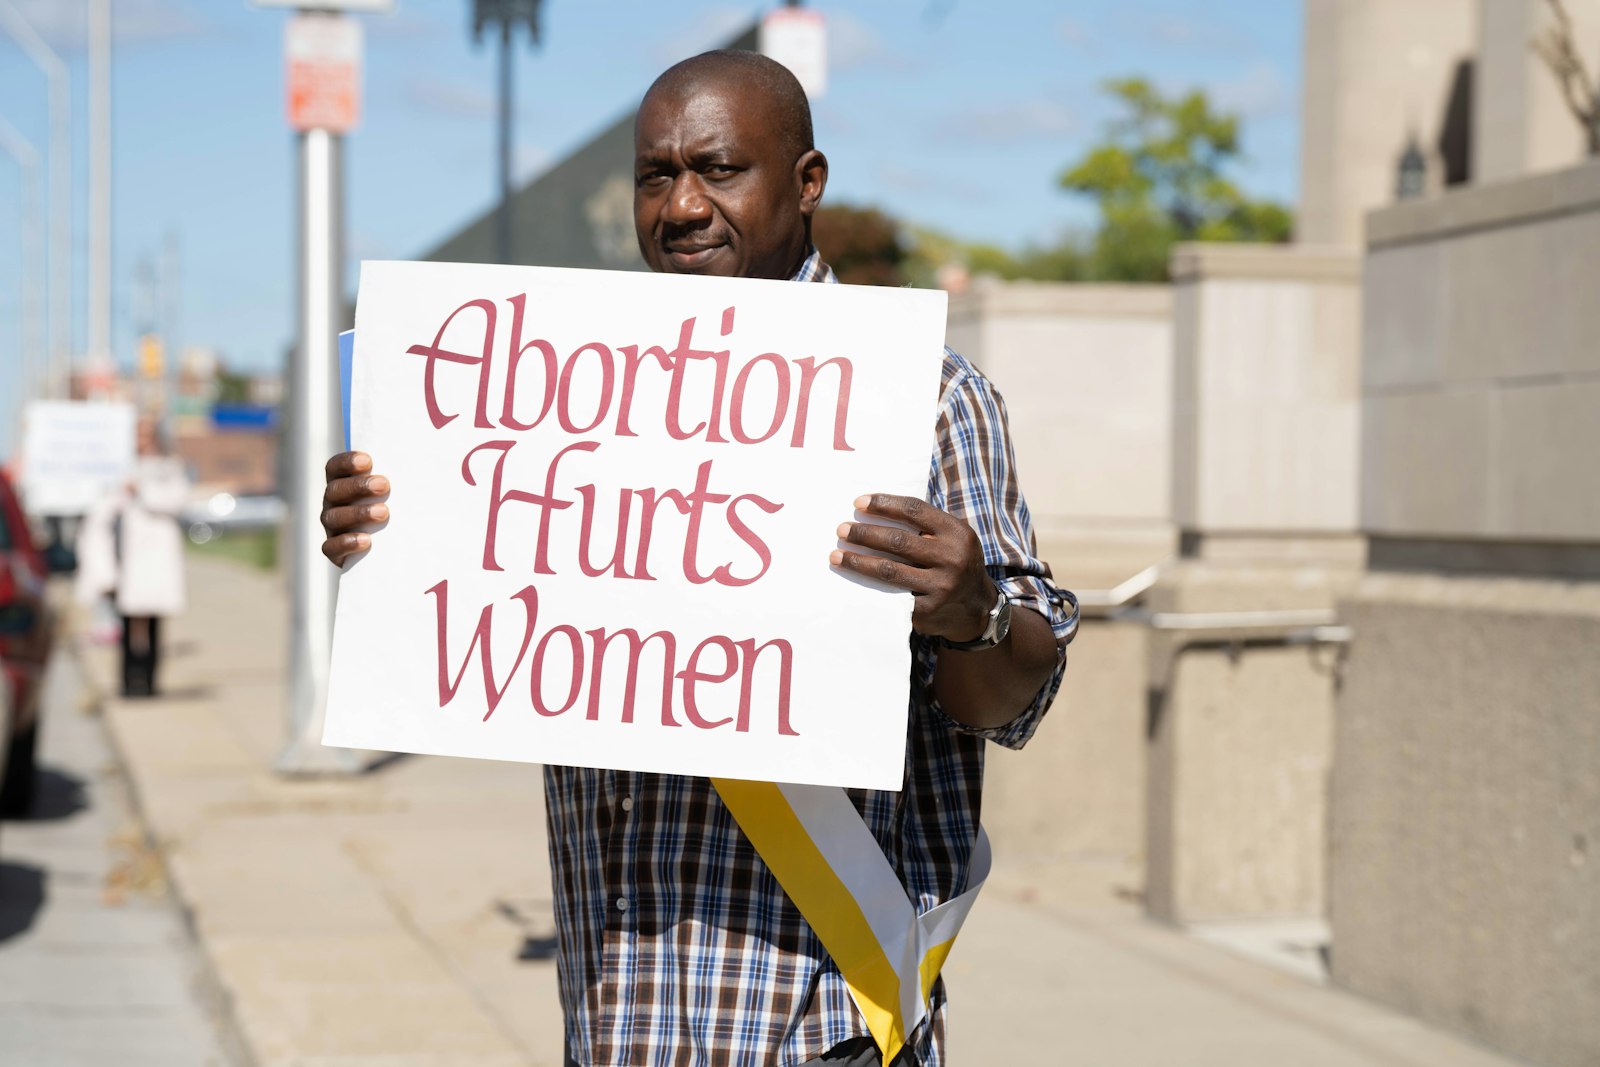 A man holds a sign while participating in a Life Chain outside the Cathedral of the Most Blessed Sacrament on Respect Life Sunday, Oct. 2. The Catholic Church is mobilizing against the "vast and extreme" Proposal 3, which would eliminate virtually all pro-life laws in the state and enshrine abortion as a constitutional right, even for minors without parental consent. (Valaurian Waller | Detroit Catholic)